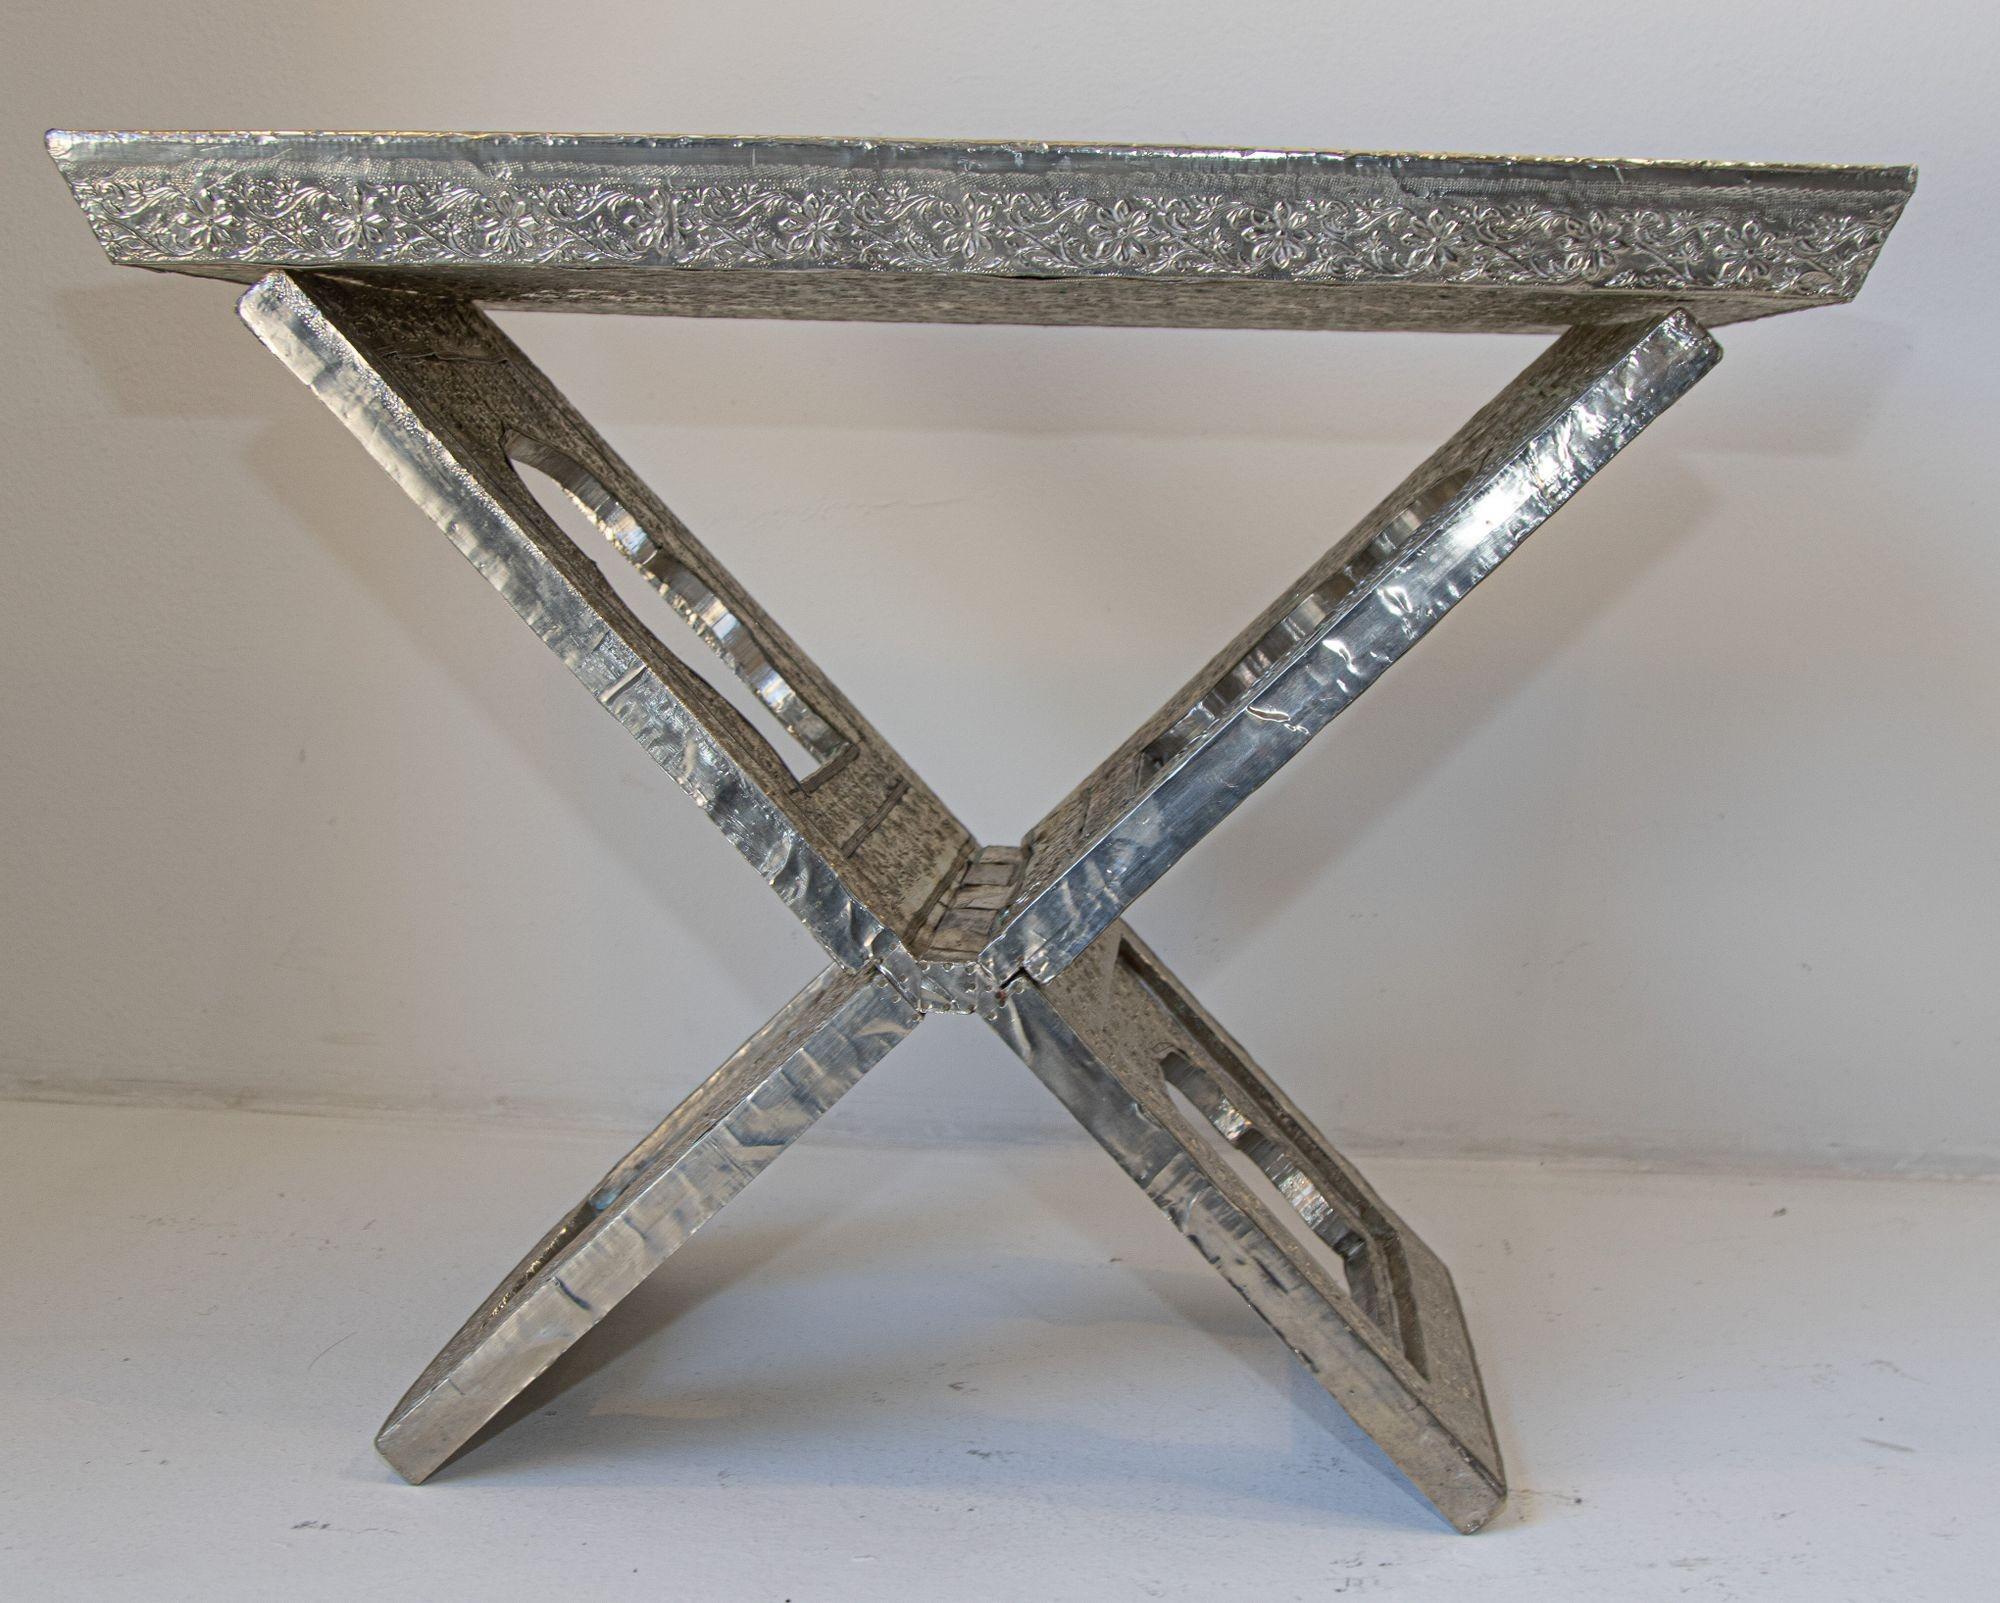 1960 Anglo-Indian silver wrapped clad folding tray table.
Vintage Anglo-Indian silver wrapped clad tray table. Anglo Raj side table hand-hammered with repousse silver metal work over wood very nice and unusual.
Great vintage Anglo-Indian silver